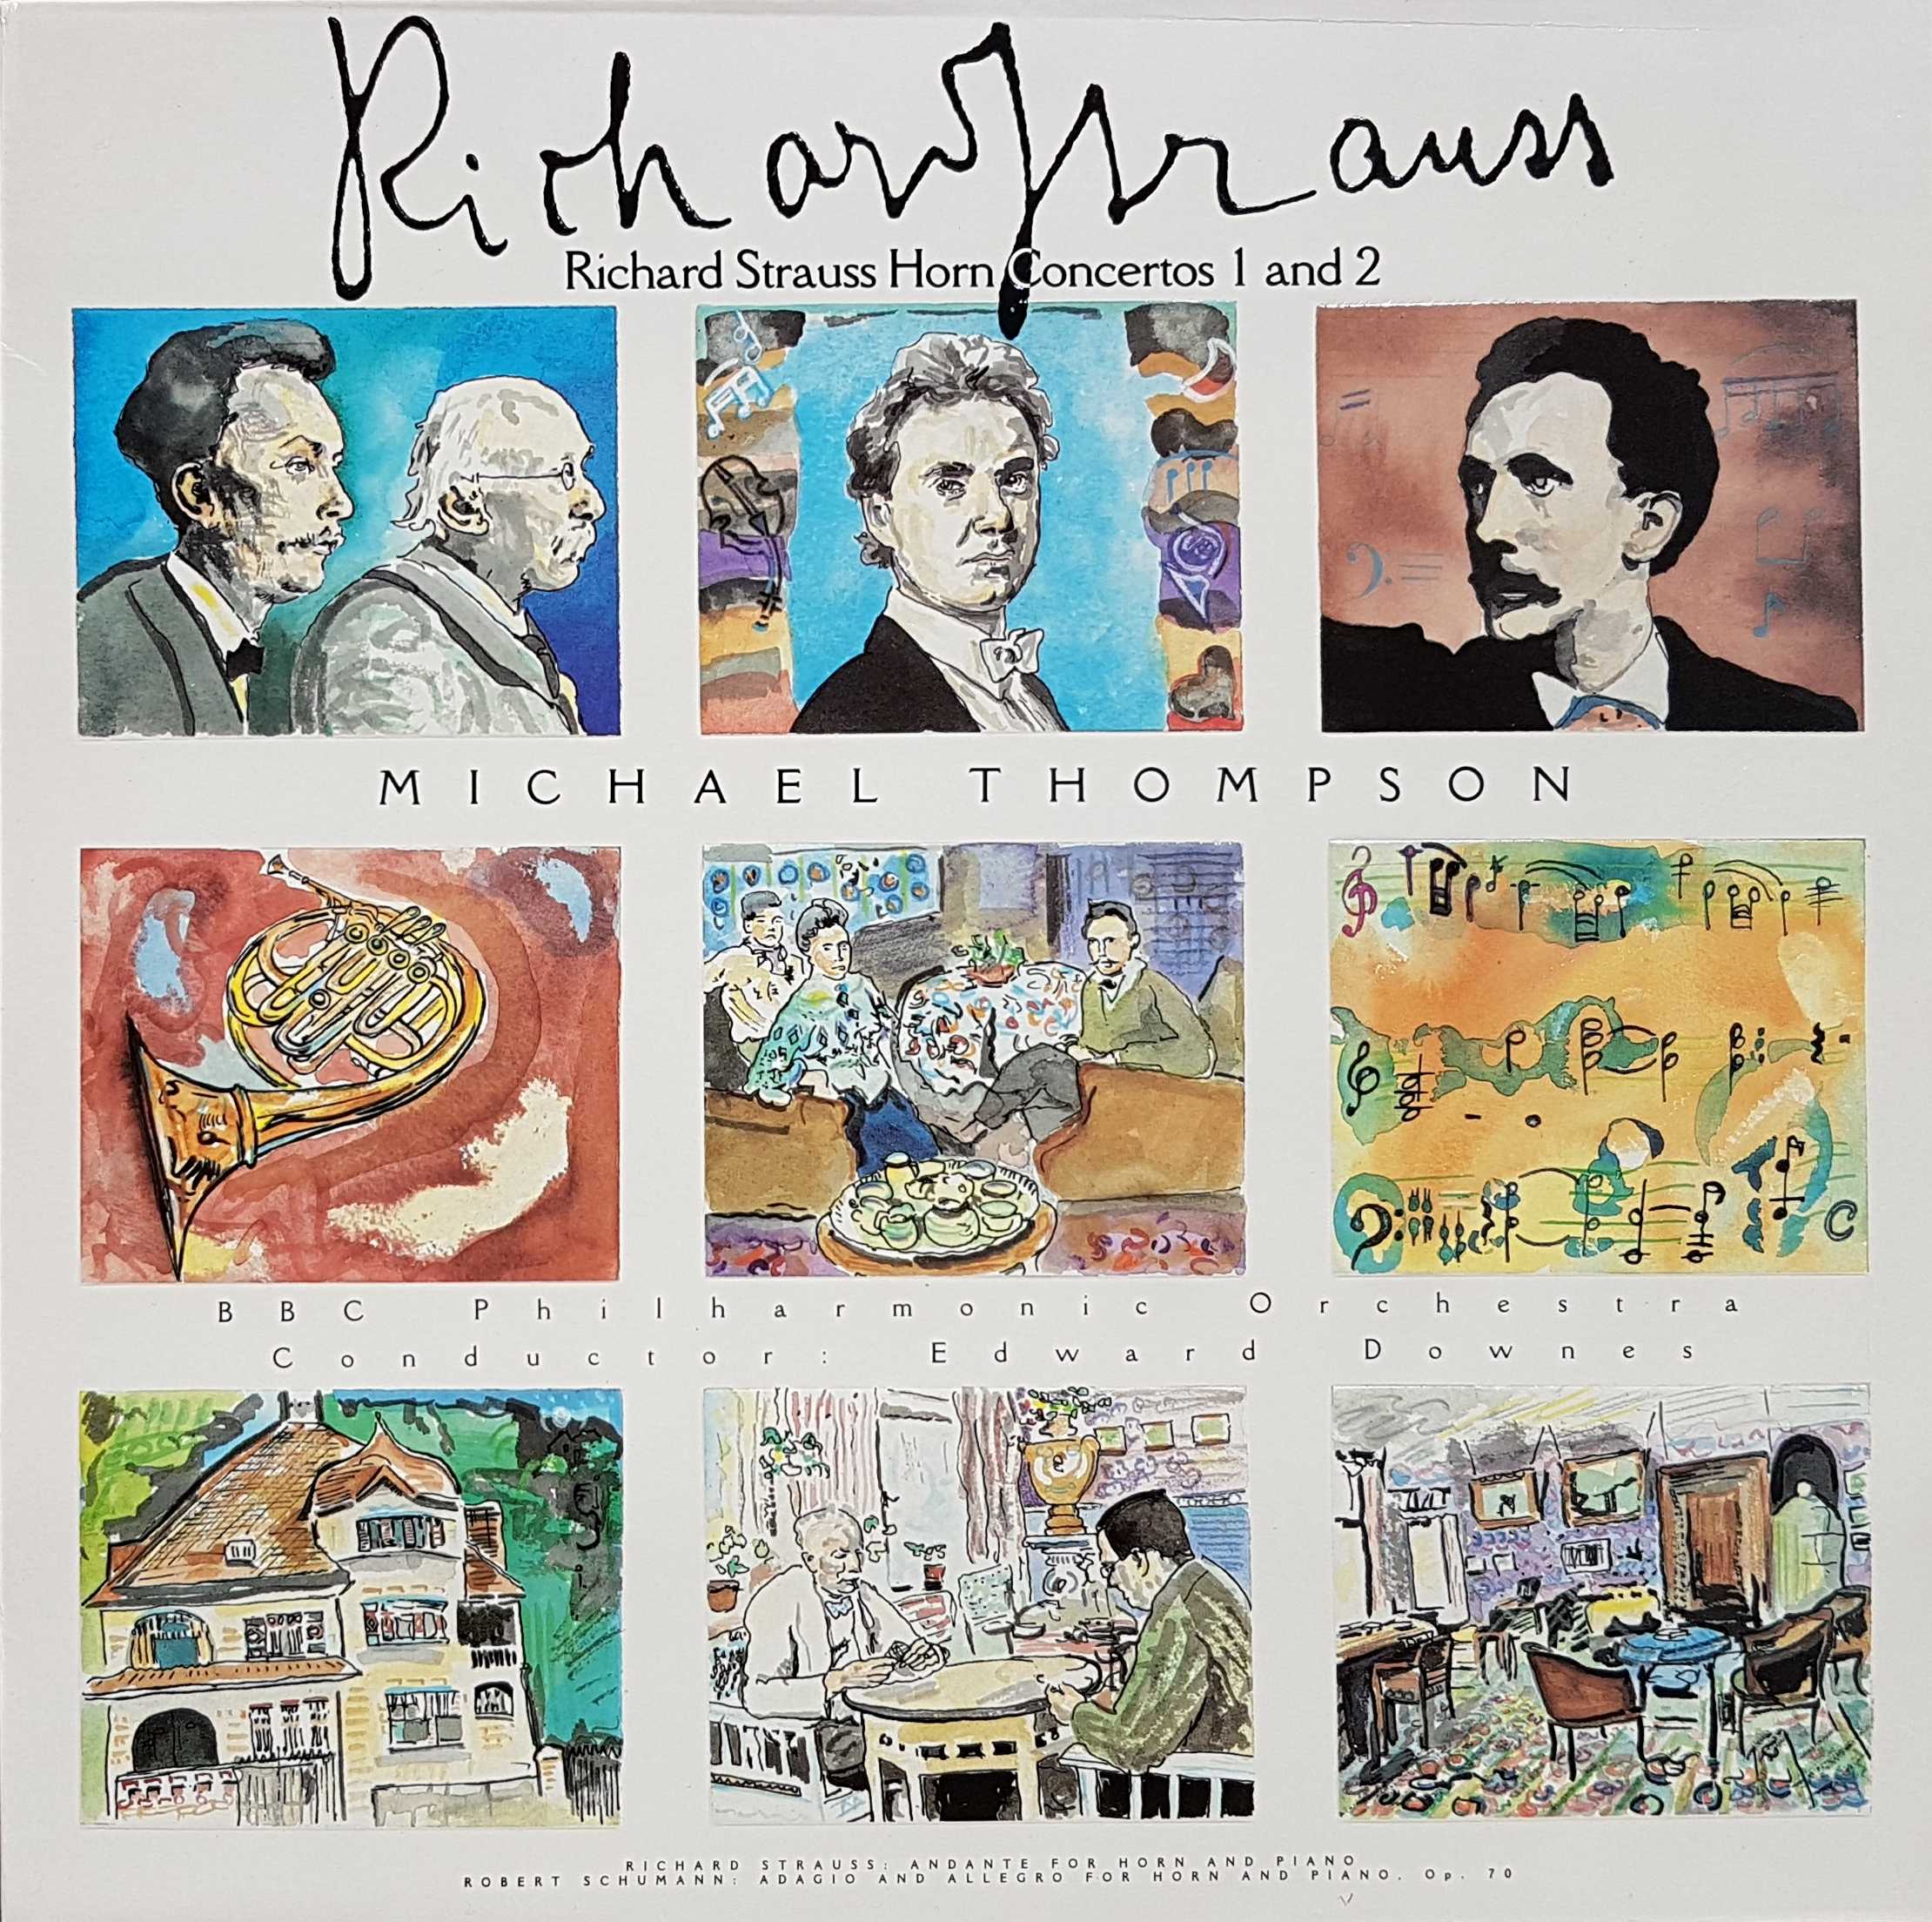 Picture of REN 641 Richard Strauss - Horn concertos by artist Richard Strauss from the BBC albums - Records and Tapes library